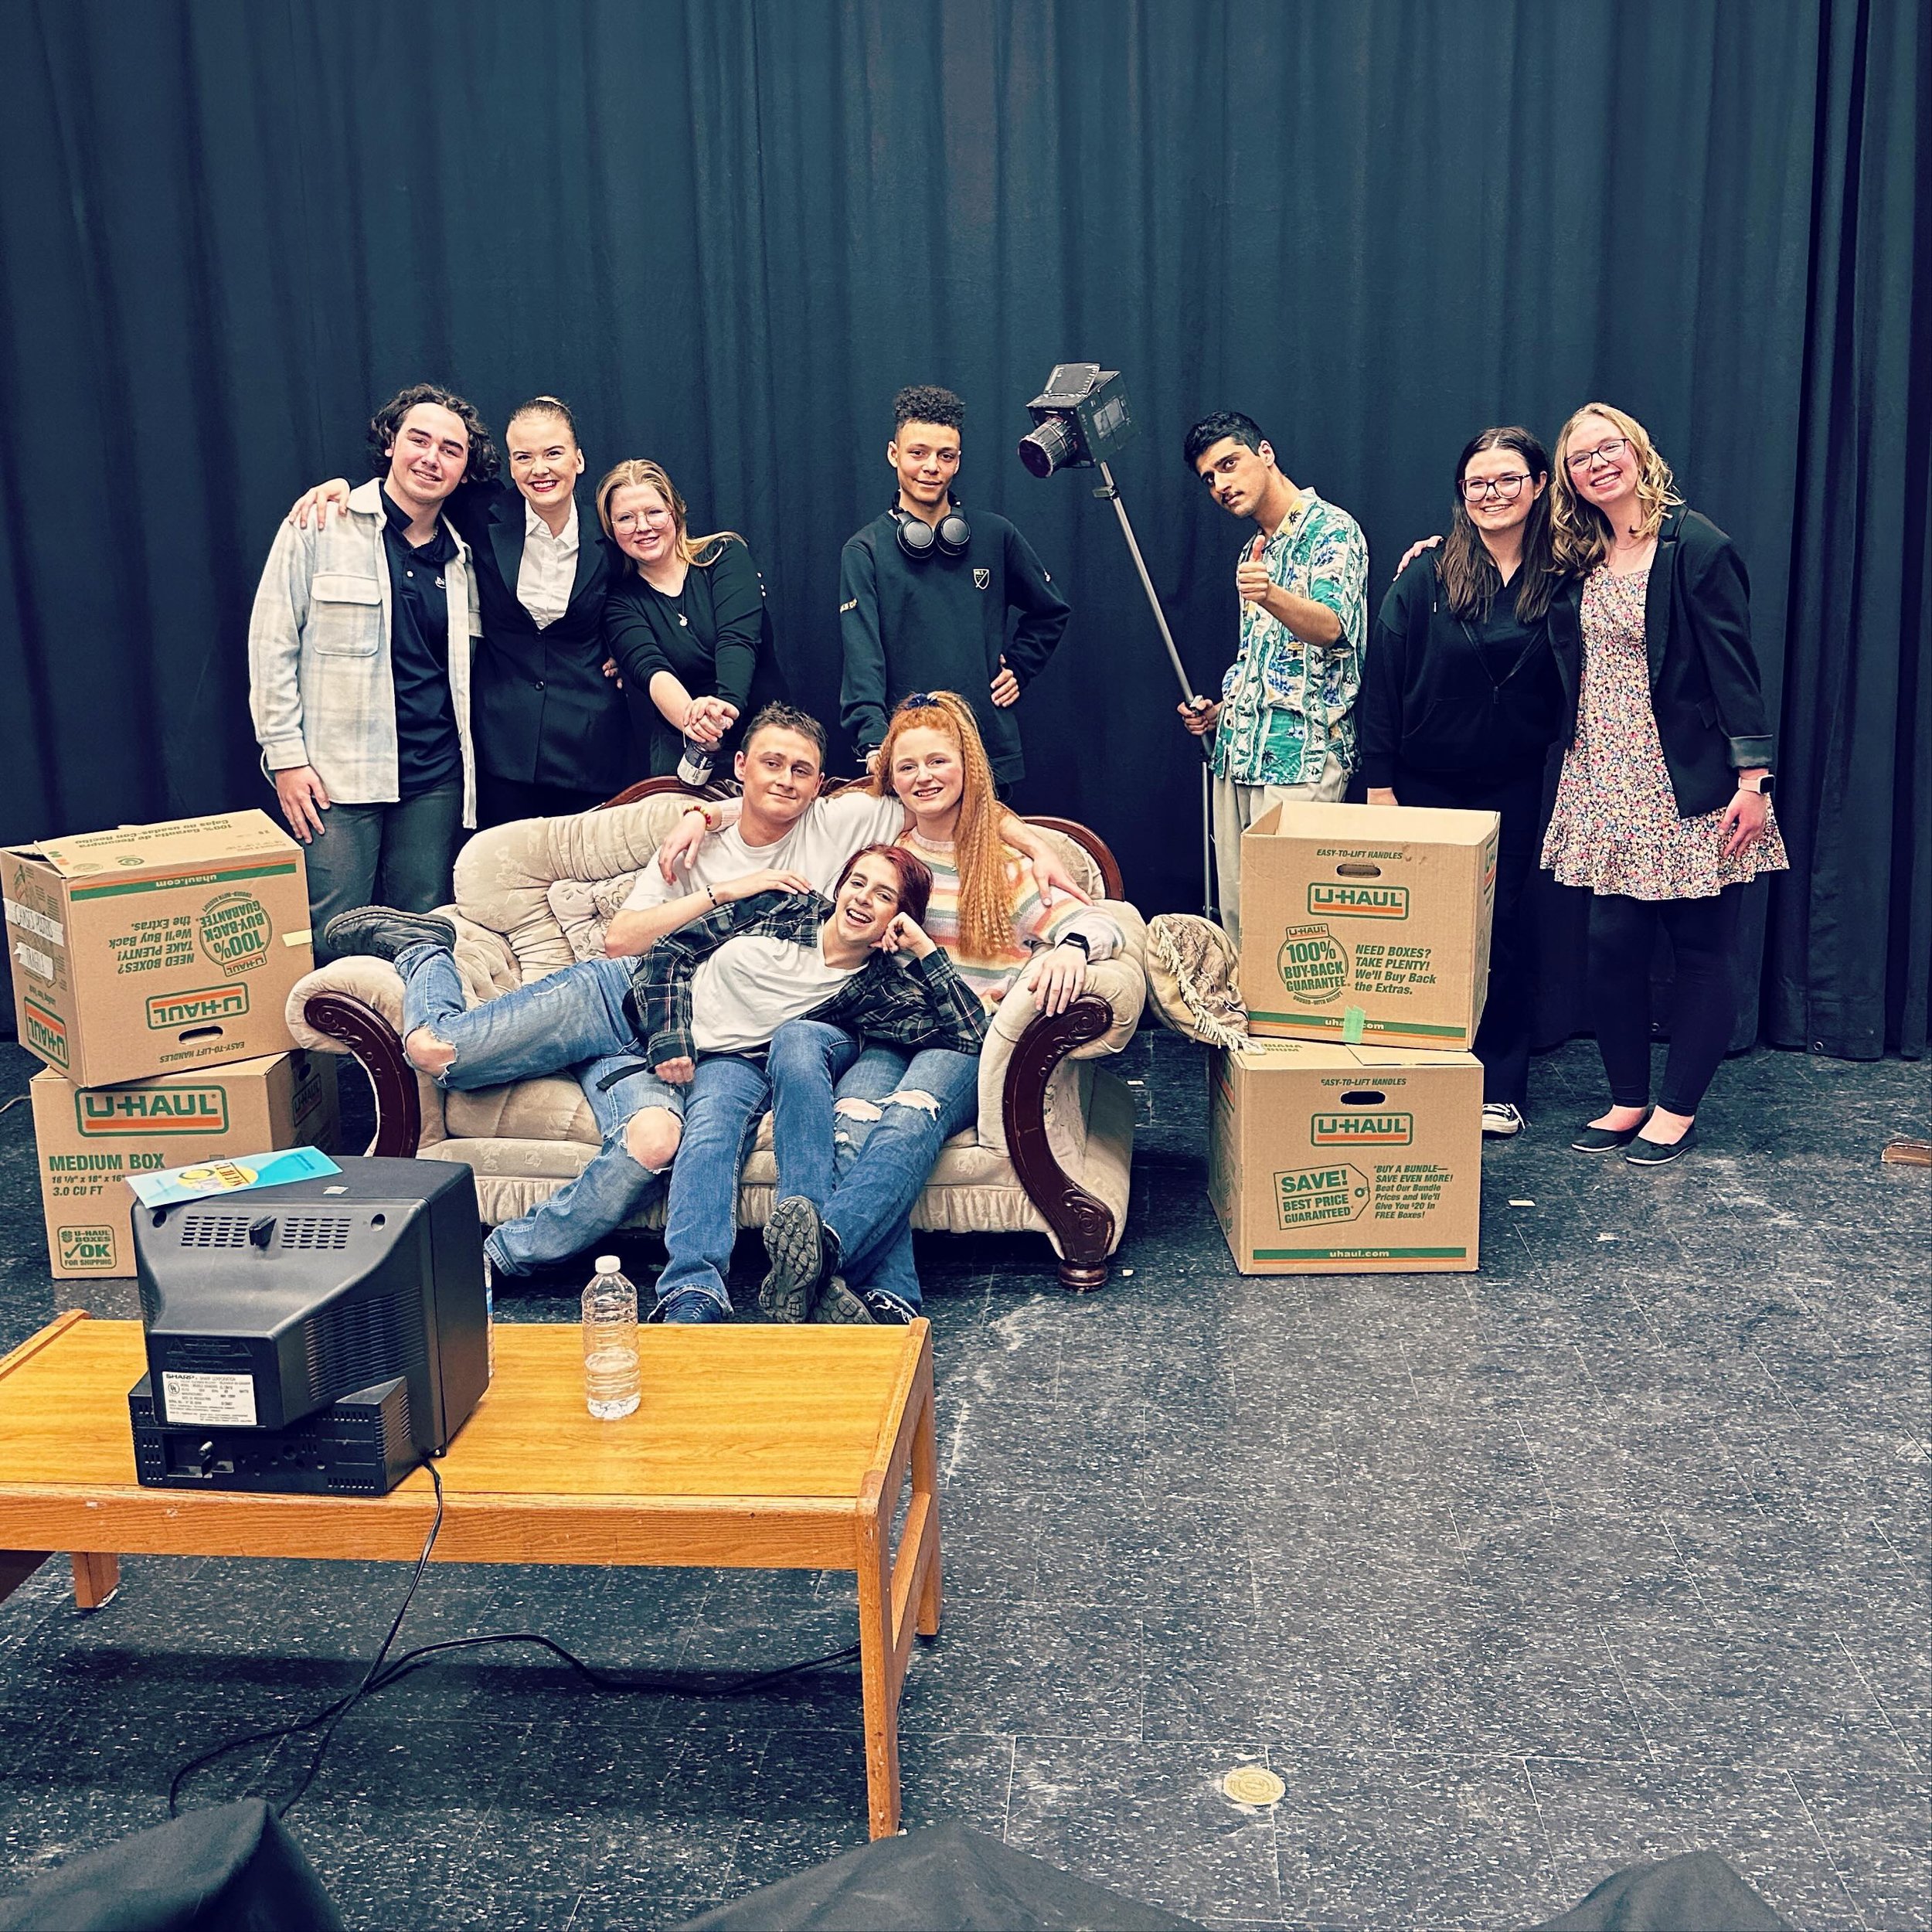 That&rsquo;s a wrap!&hellip; for tonight. Congratulations to our cast and crew for a great show. Ava McVittie is our student writer and director of this fun and thought provoking show. Next week, NTS Drama Festival!